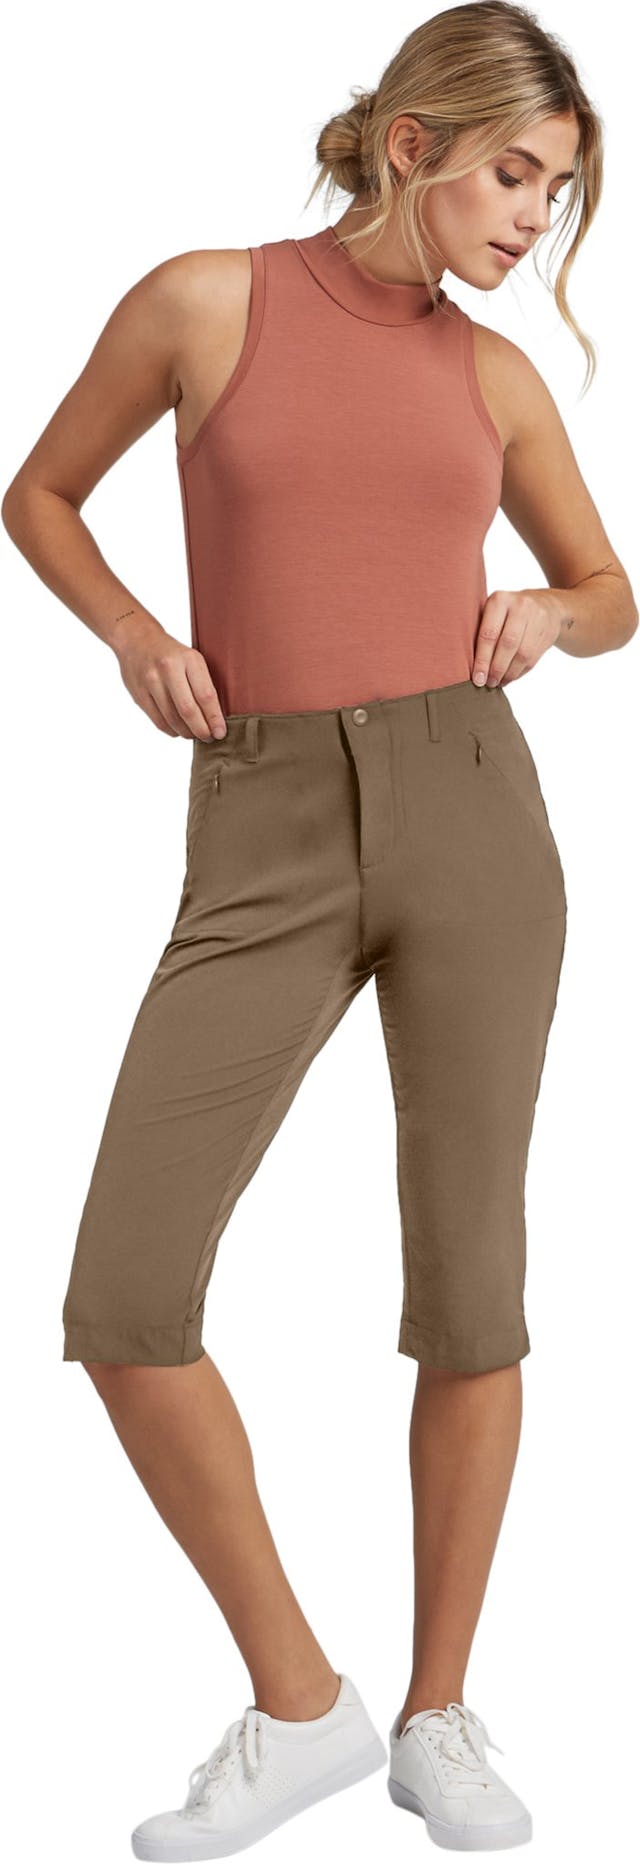 Product image for GIL Capris - Women's